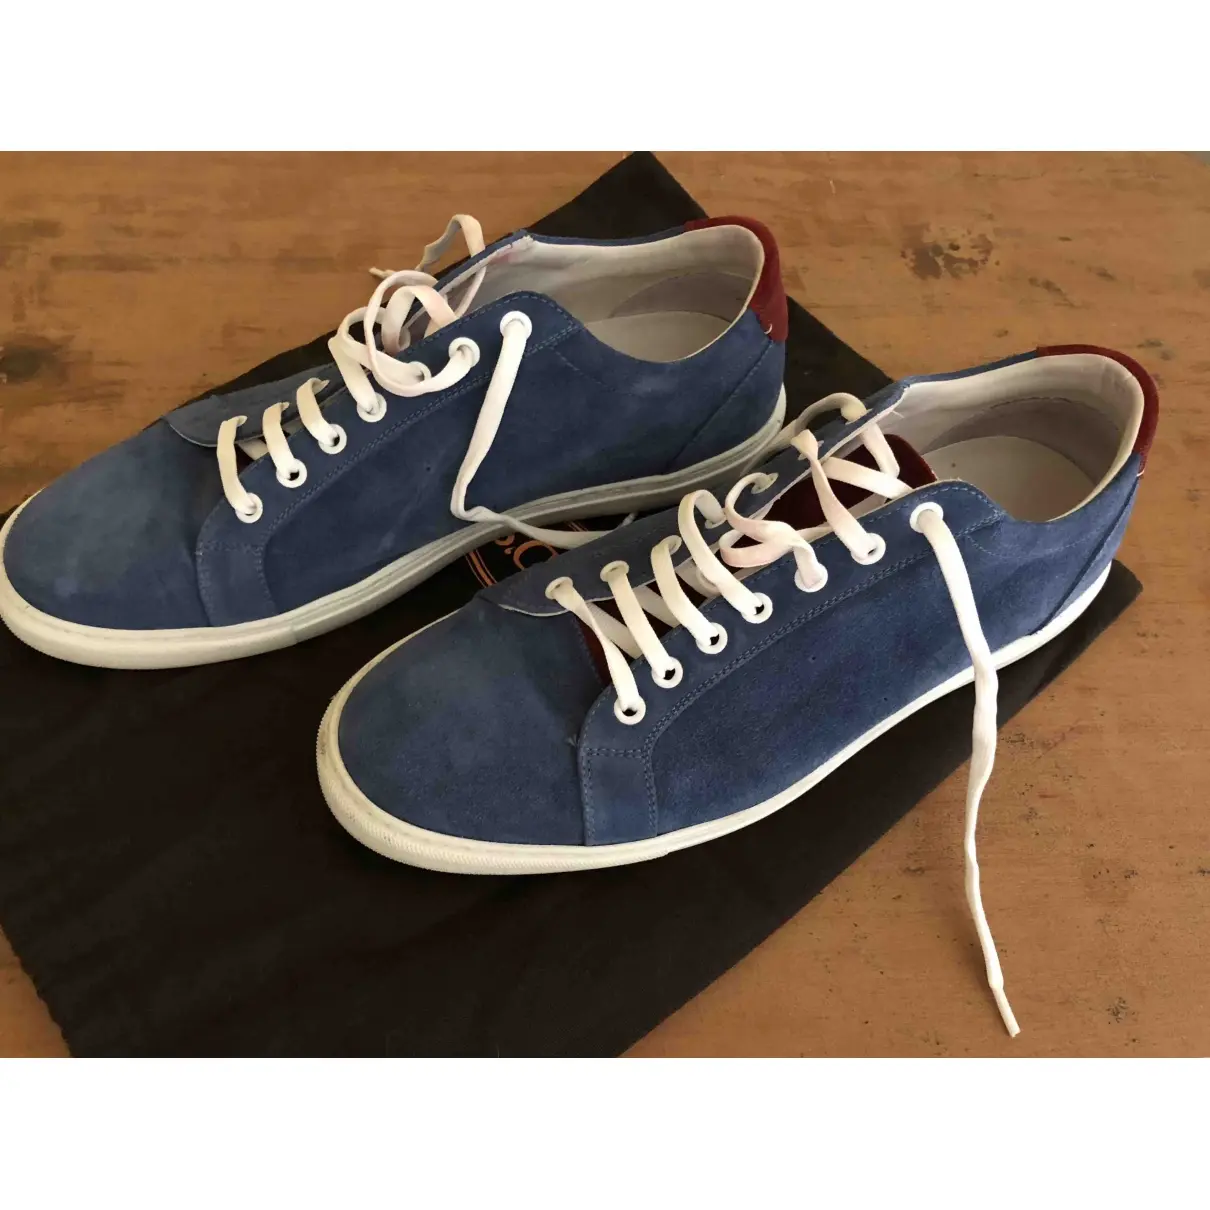 Boggi Low trainers for sale